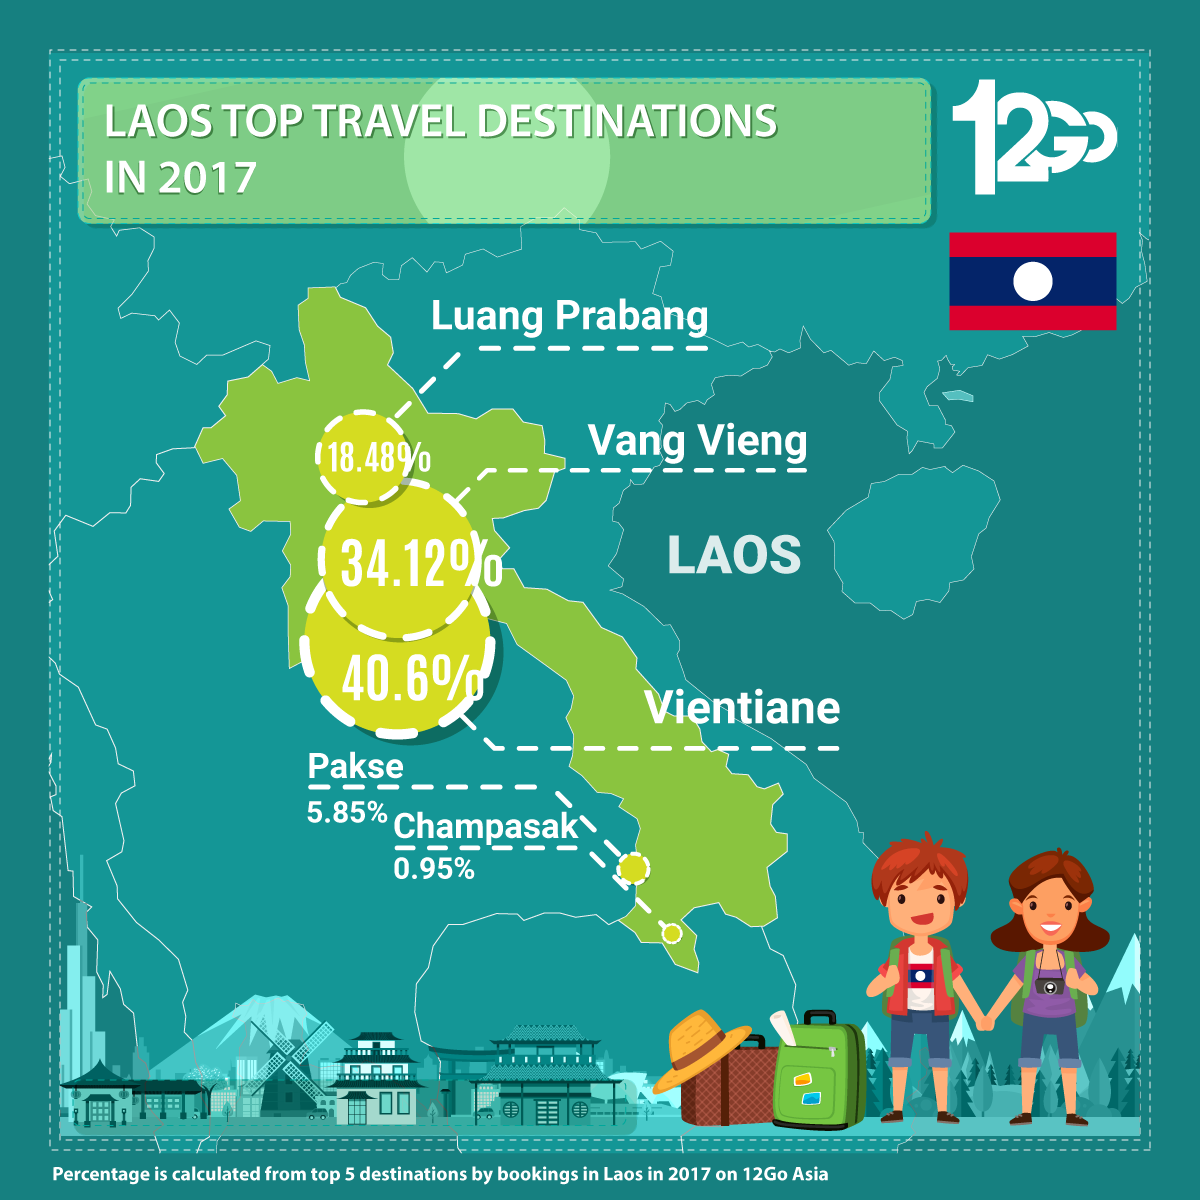 Laos Top Travel Destinations in 2017 Infographic